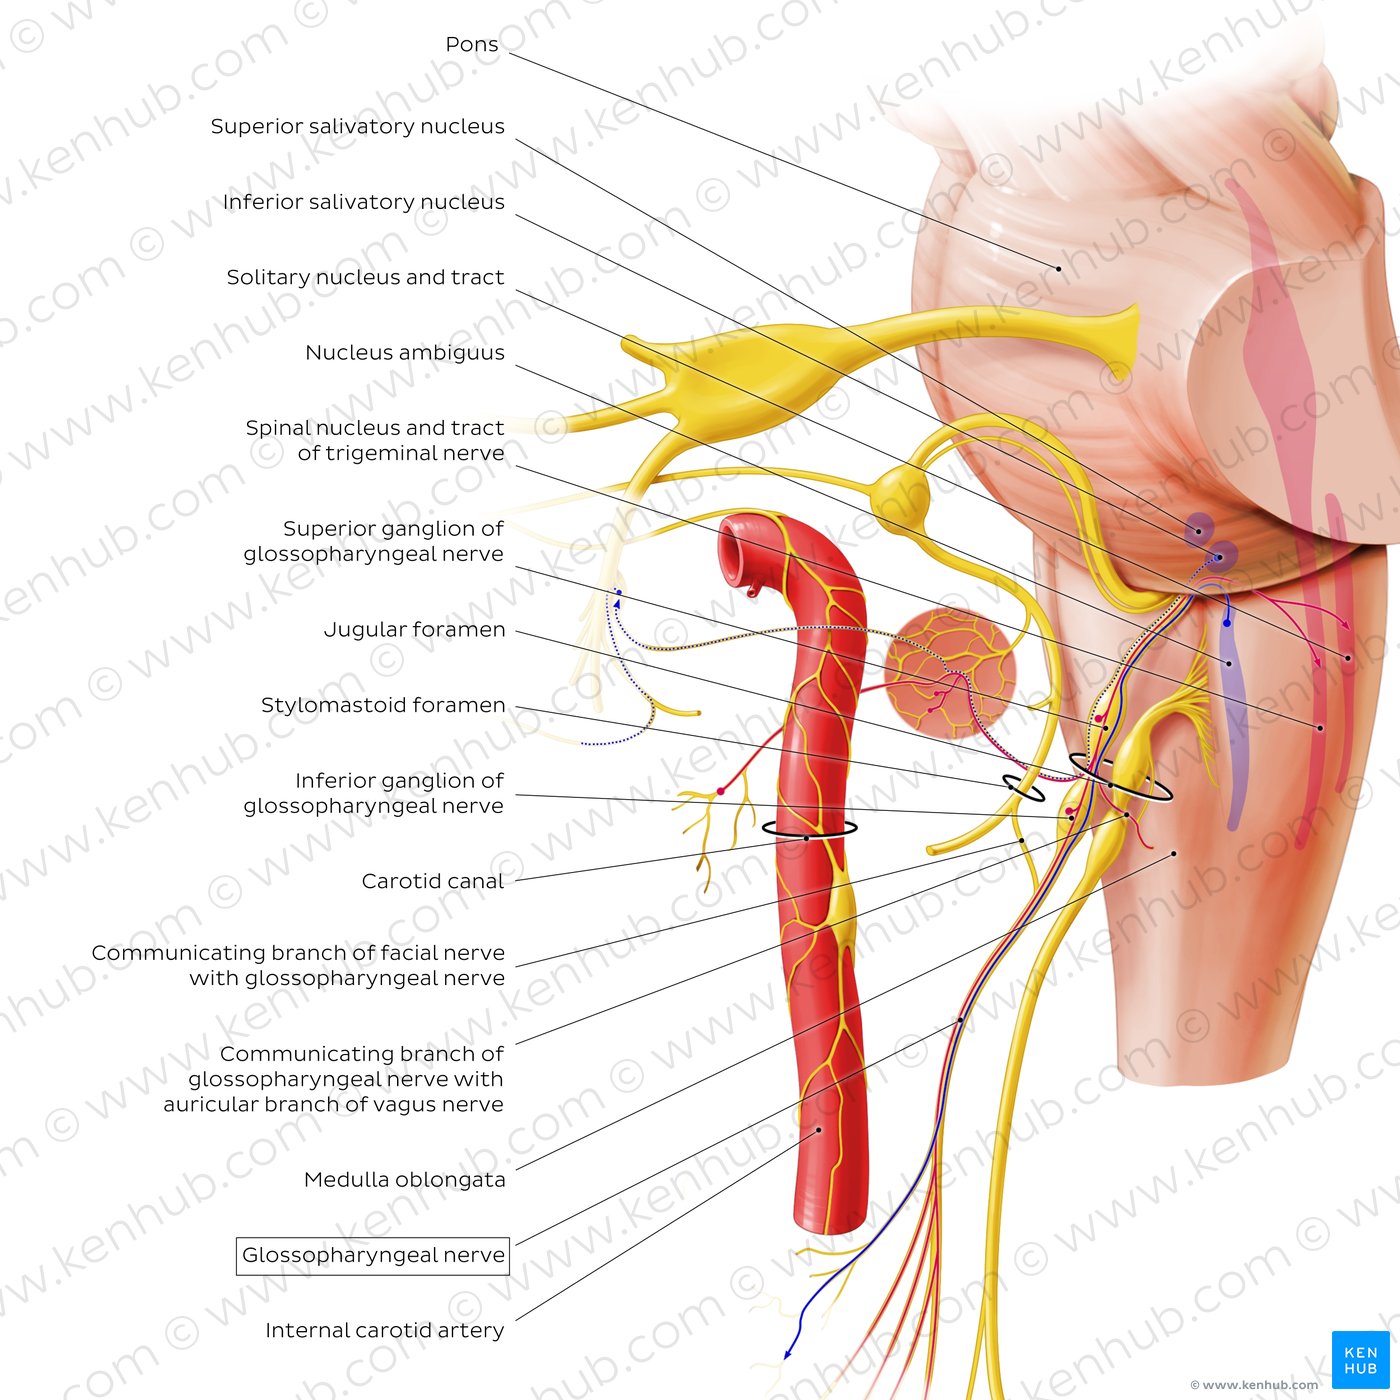 Glossopharyngeal nerve (origin and proximal branches)